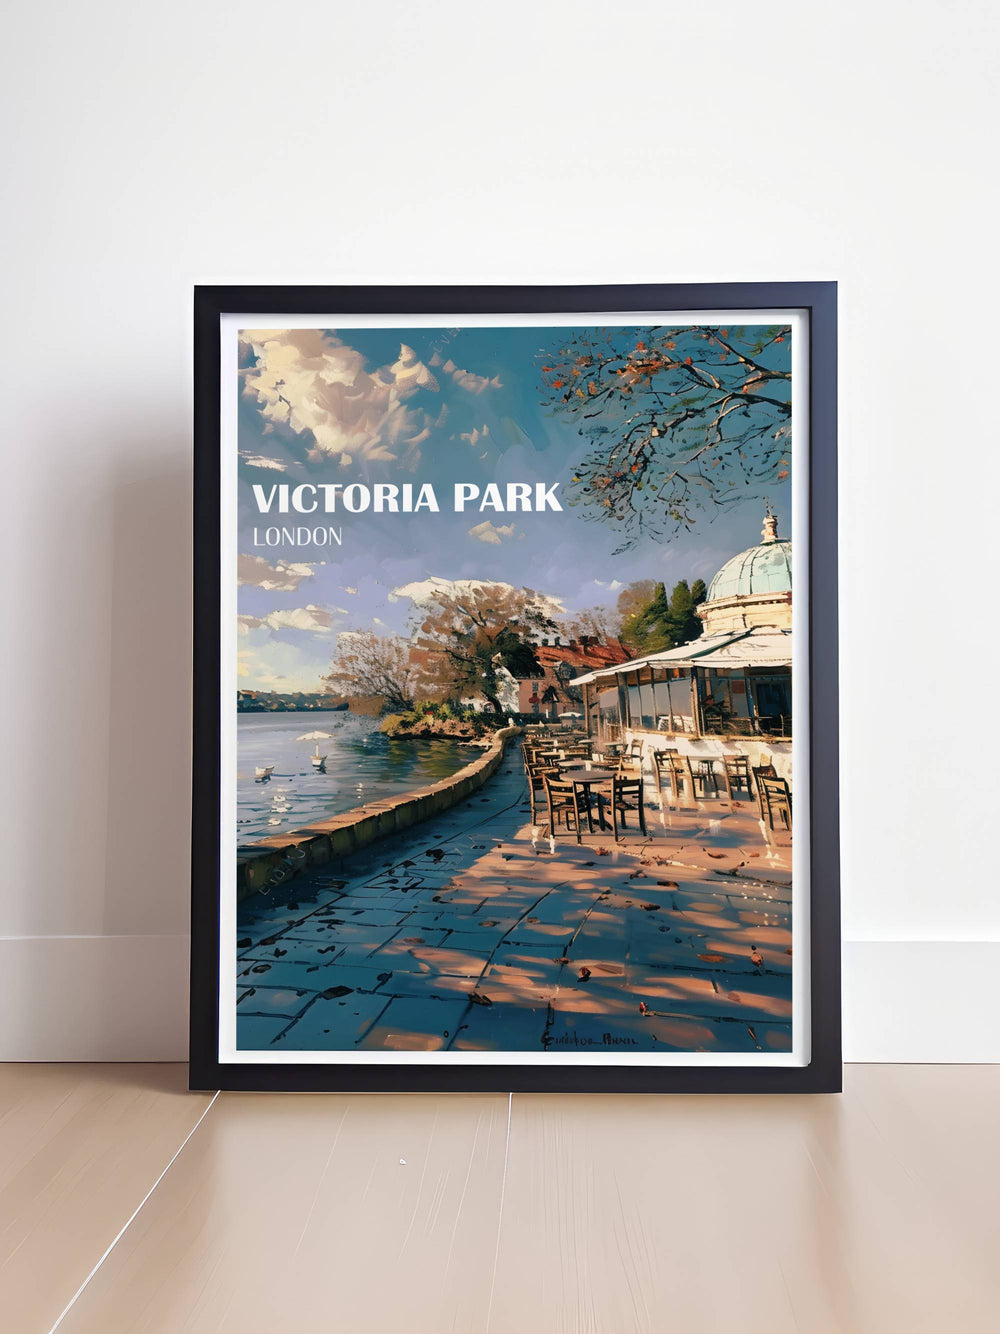 London vintage poster of Victoria Parks The Pavillion Café, capturing the tranquil ambiance and vibrant nature in exquisite detail.